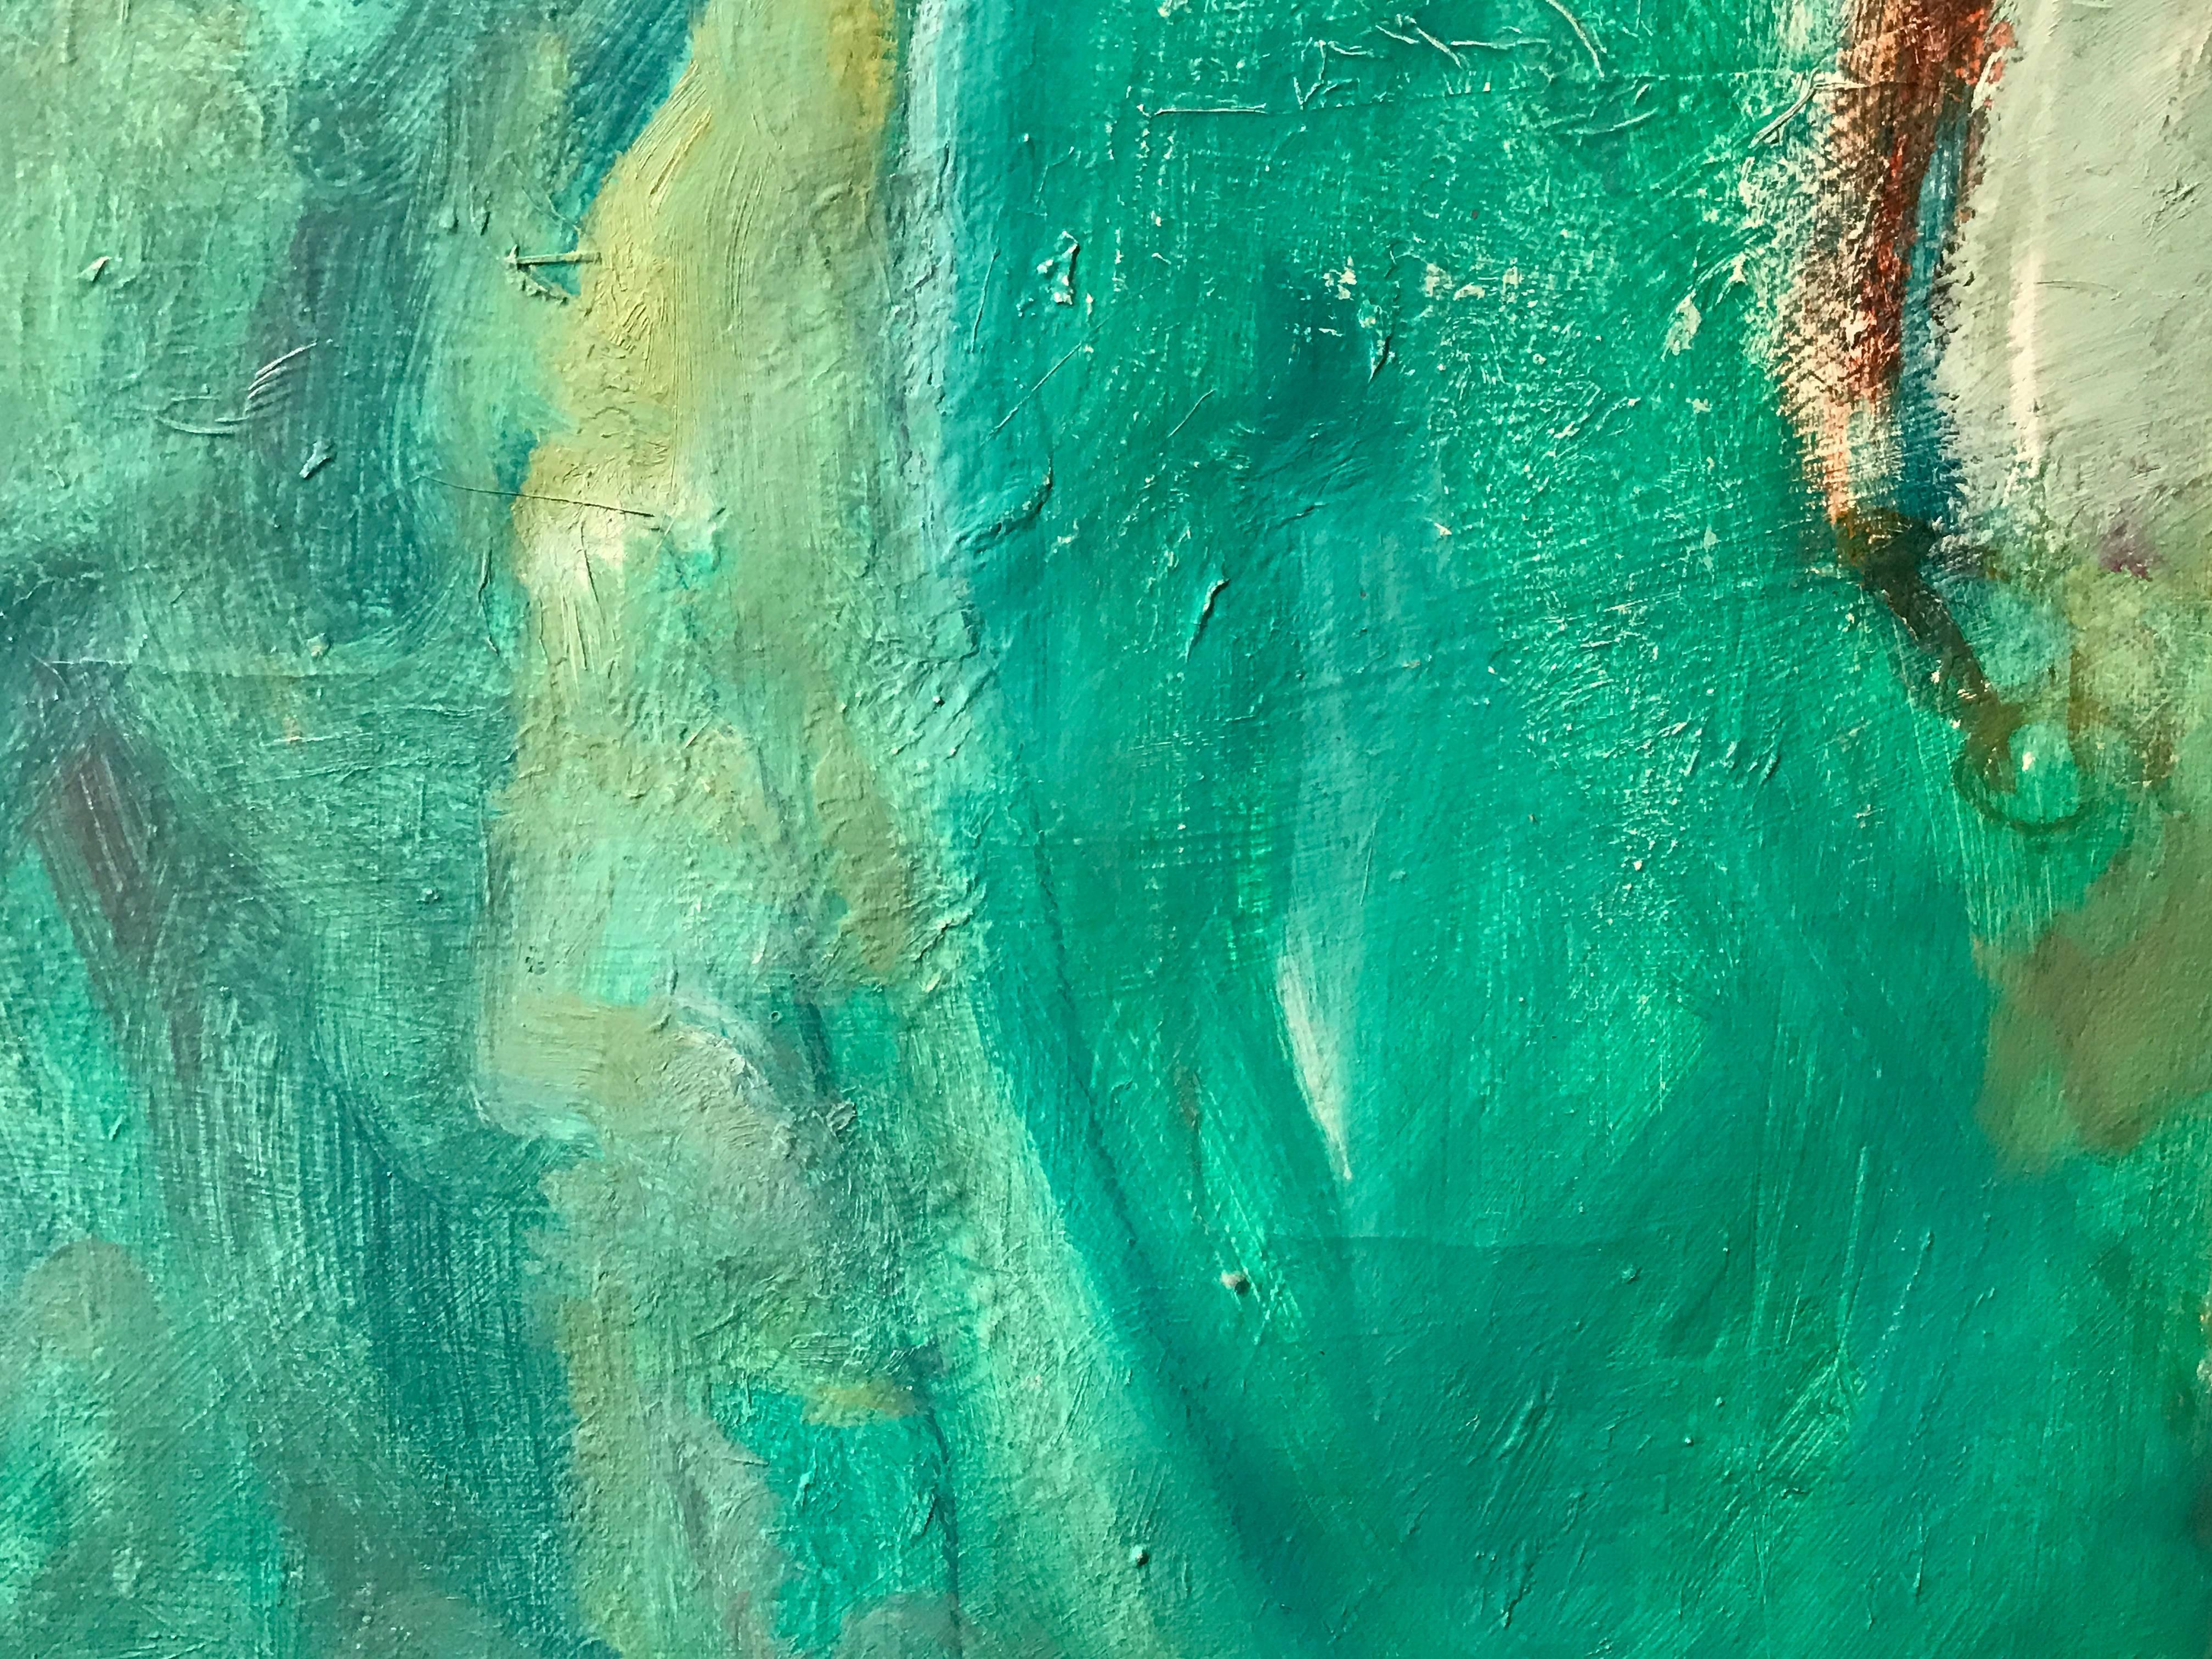 Large Original Oil Painting Abstraction Green Teal Turquoise colors - Gray Abstract Painting by Jean-Marie Deroche